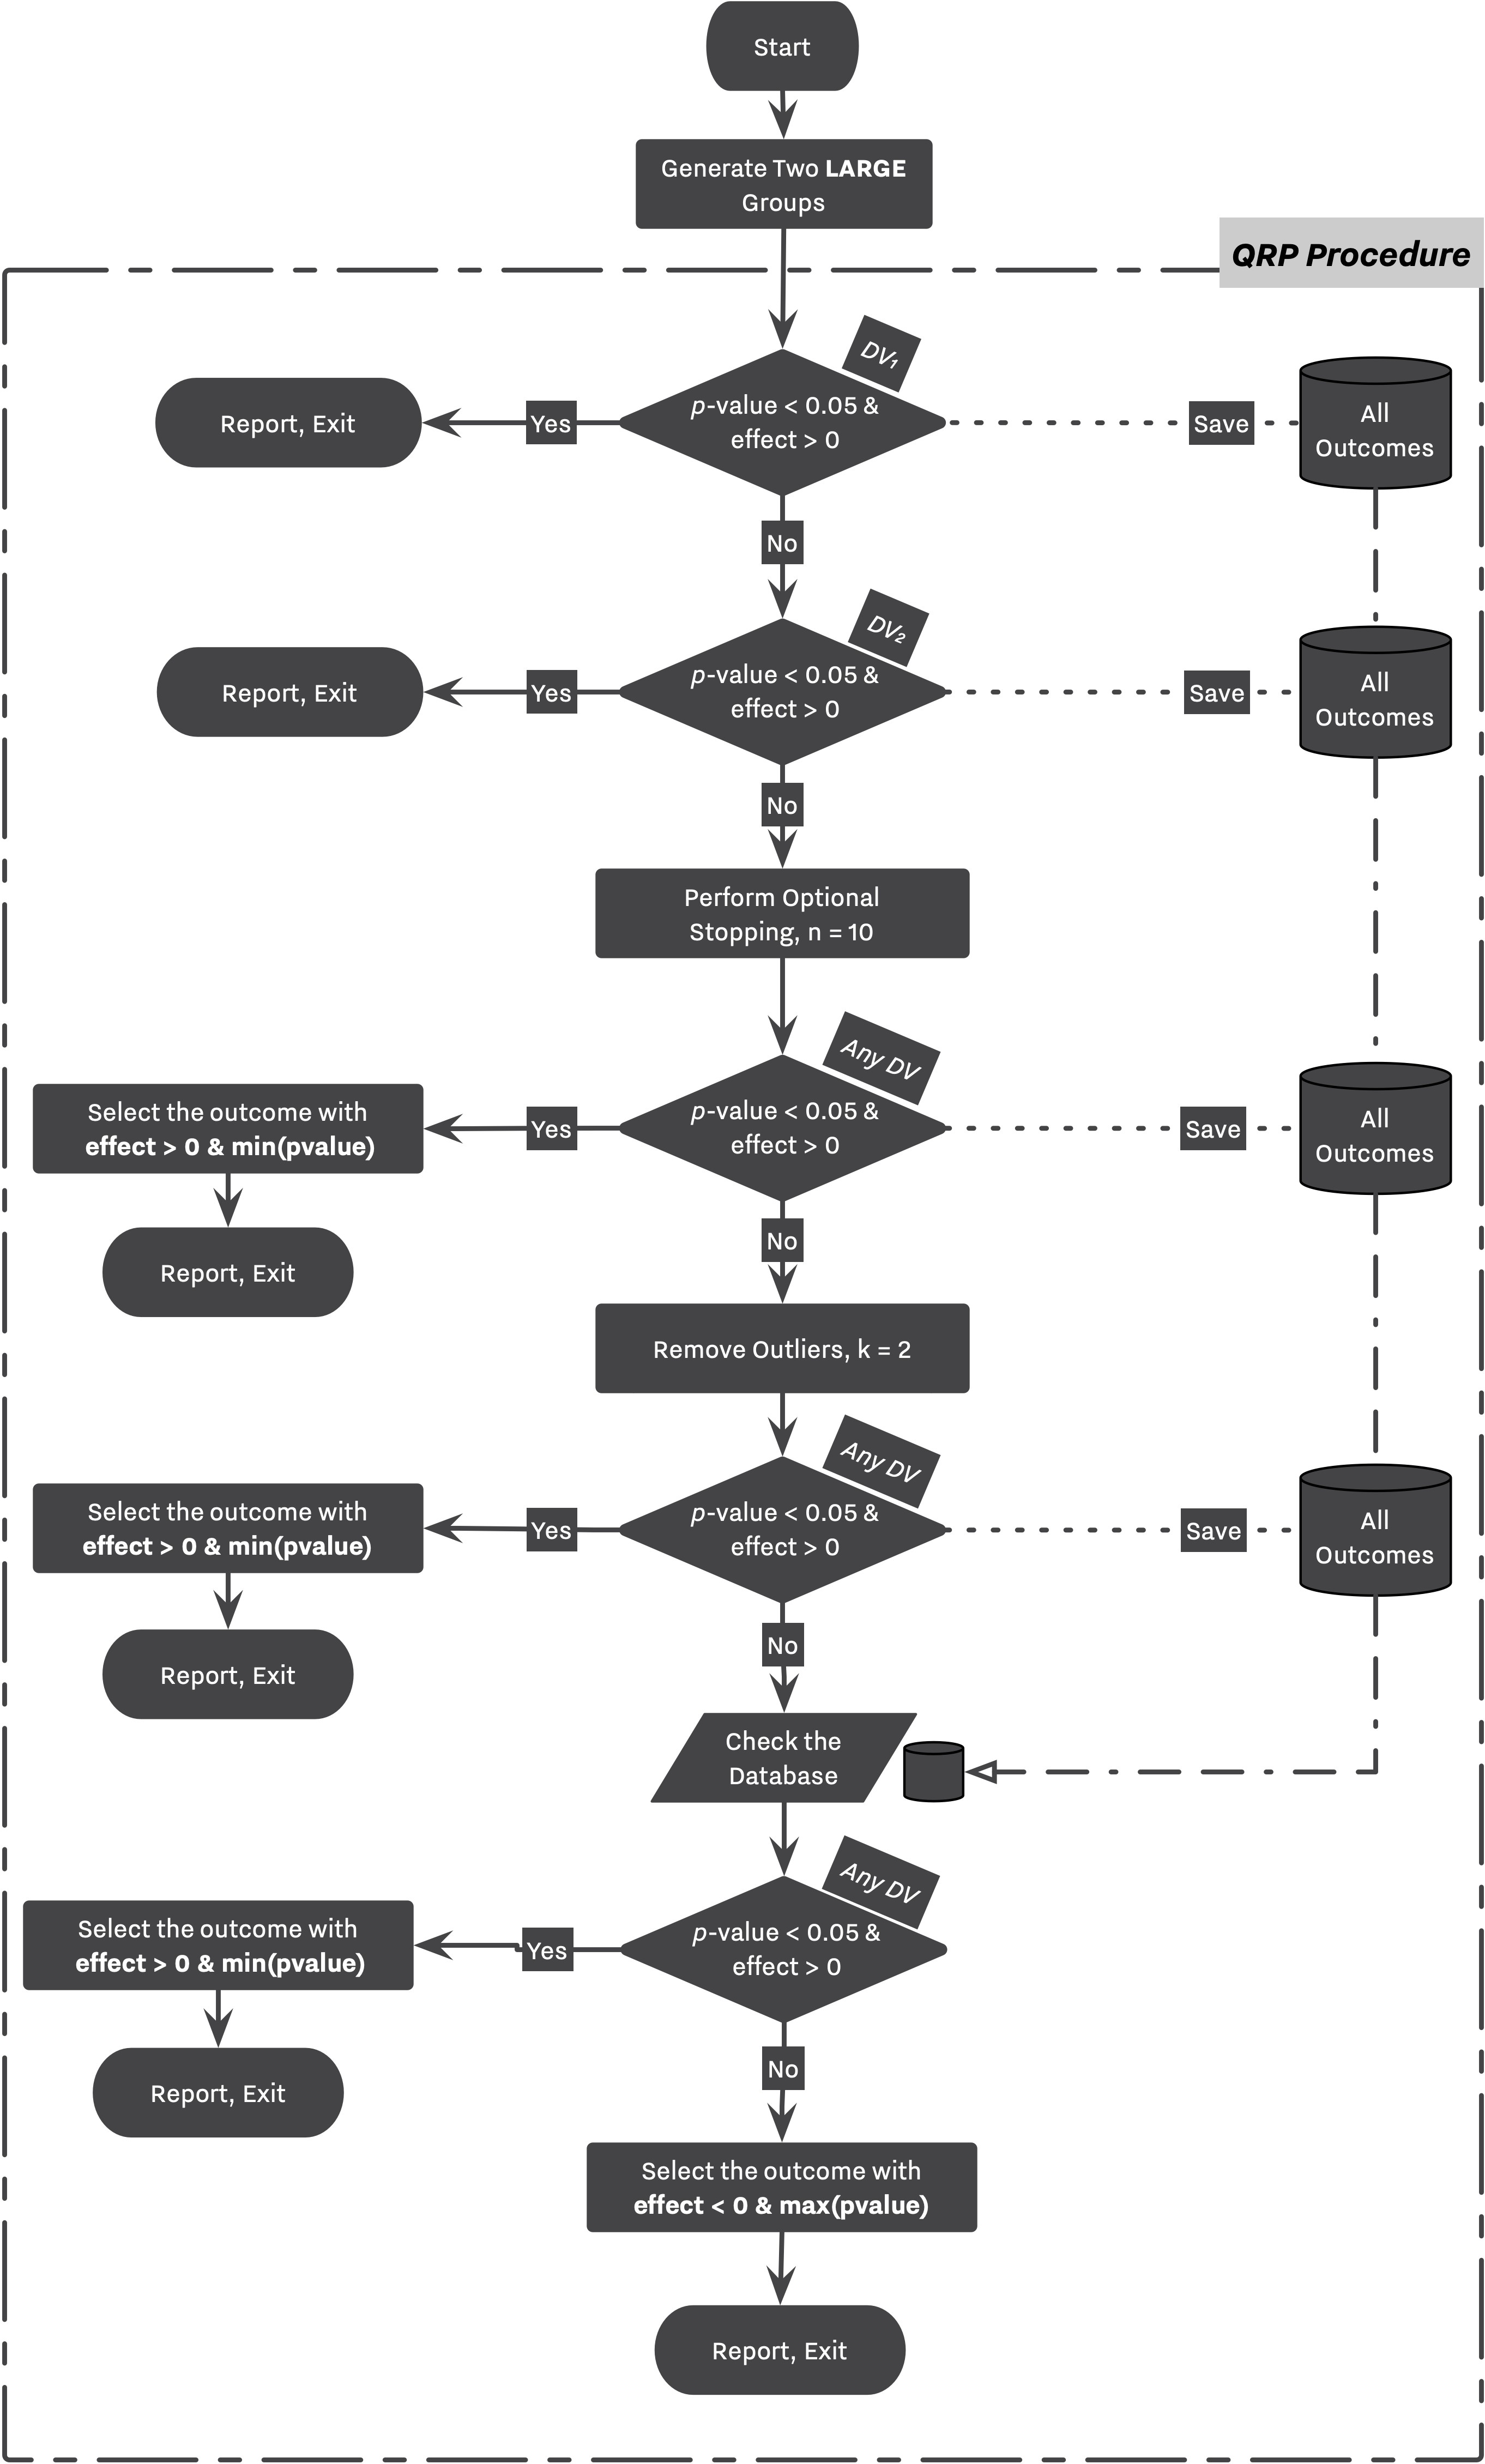 Flowchart describing Strategy 1, and 2. In the case of Strategy 1, the simulation does not enter the QRP Procedure and reports the first dependent variable.